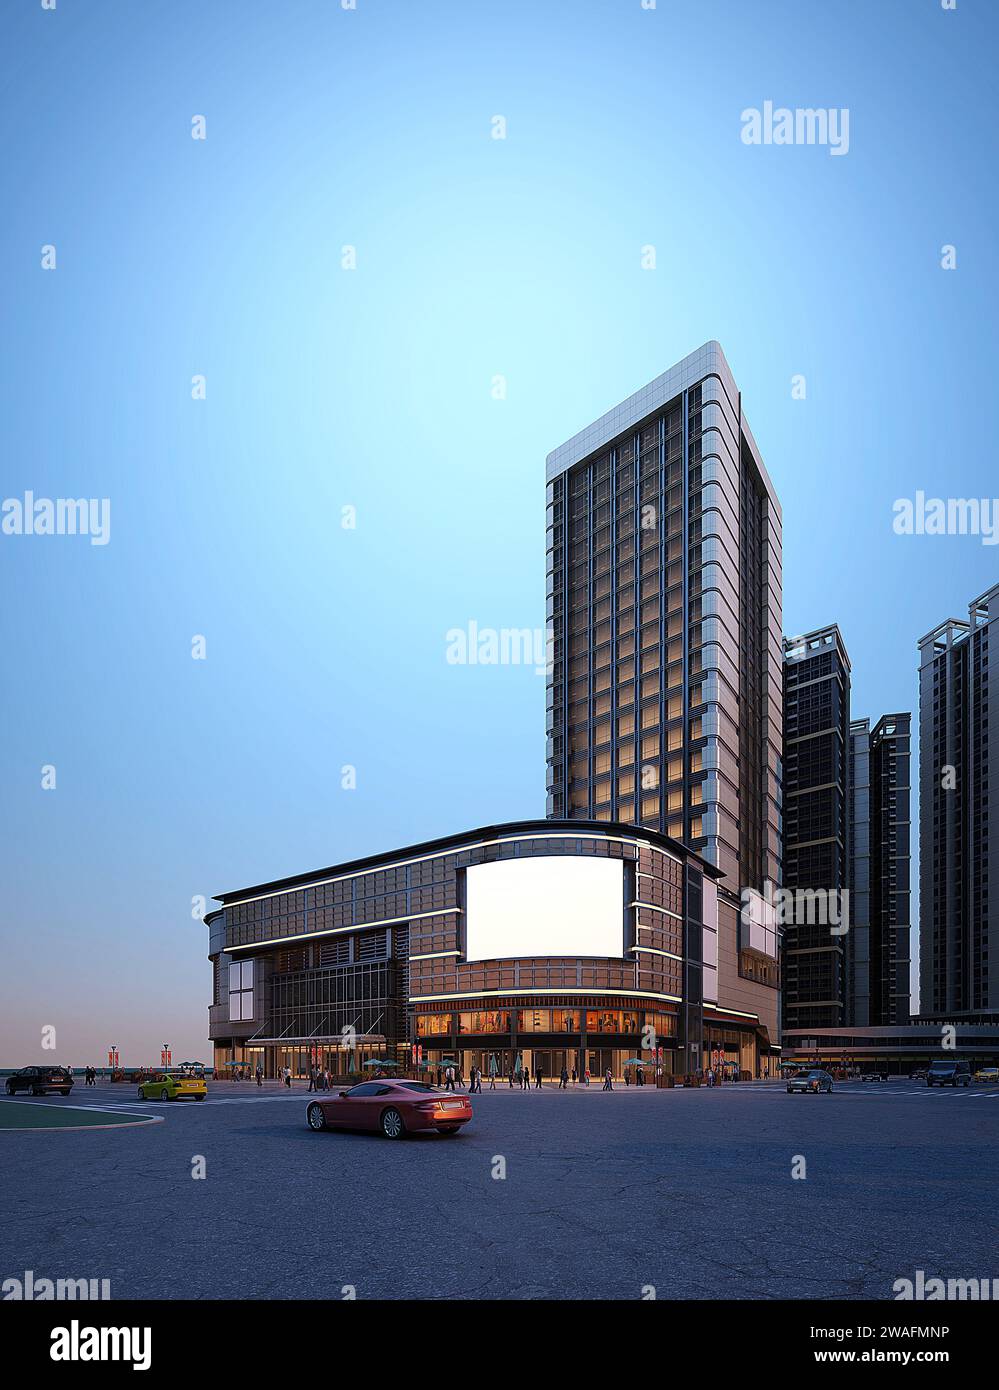 3d render of skyscrapers  shopping mall exterior view at night Stock Photo